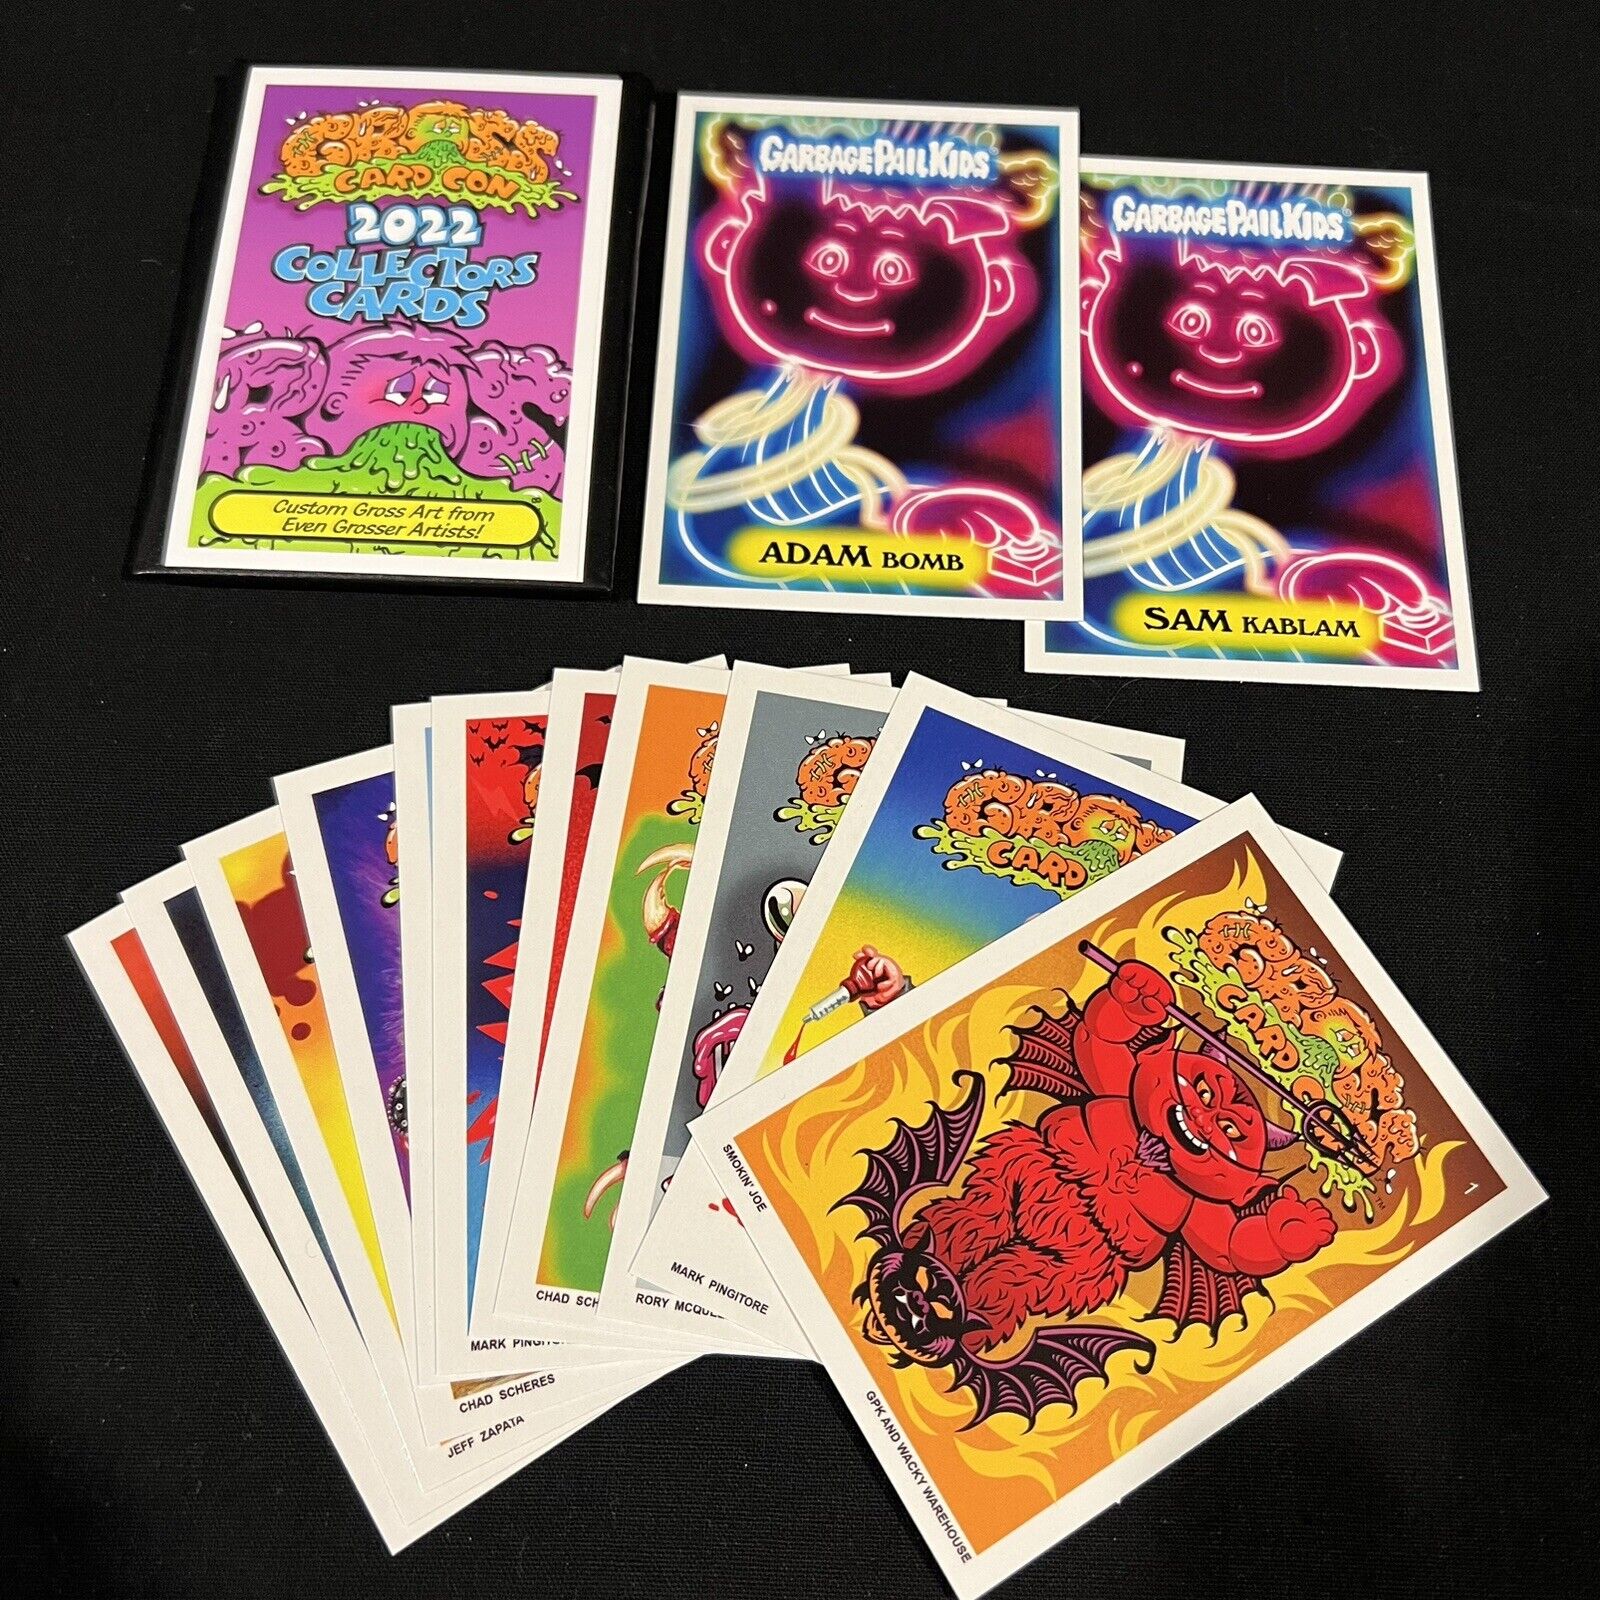 2022 GARBAGE PAIL KIDS GROSS CARD CARD CON SET WITH 2 FREE ADAM BOMB PROMO CARDS